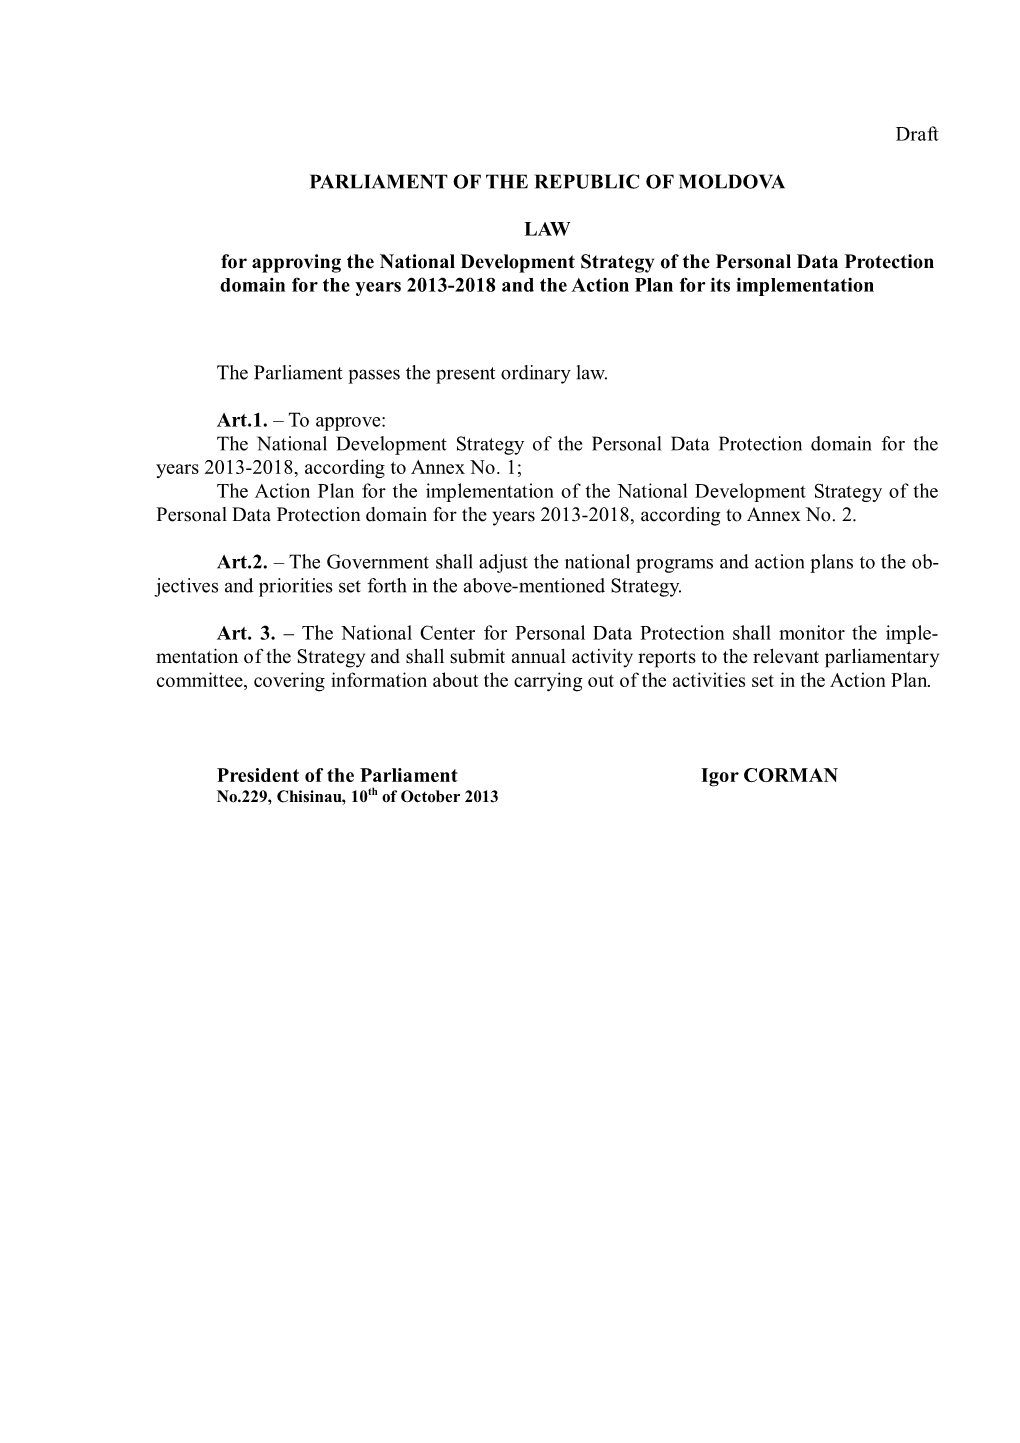 Draft PARLIAMENT of the REPUBLIC of MOLDOVA LAW For